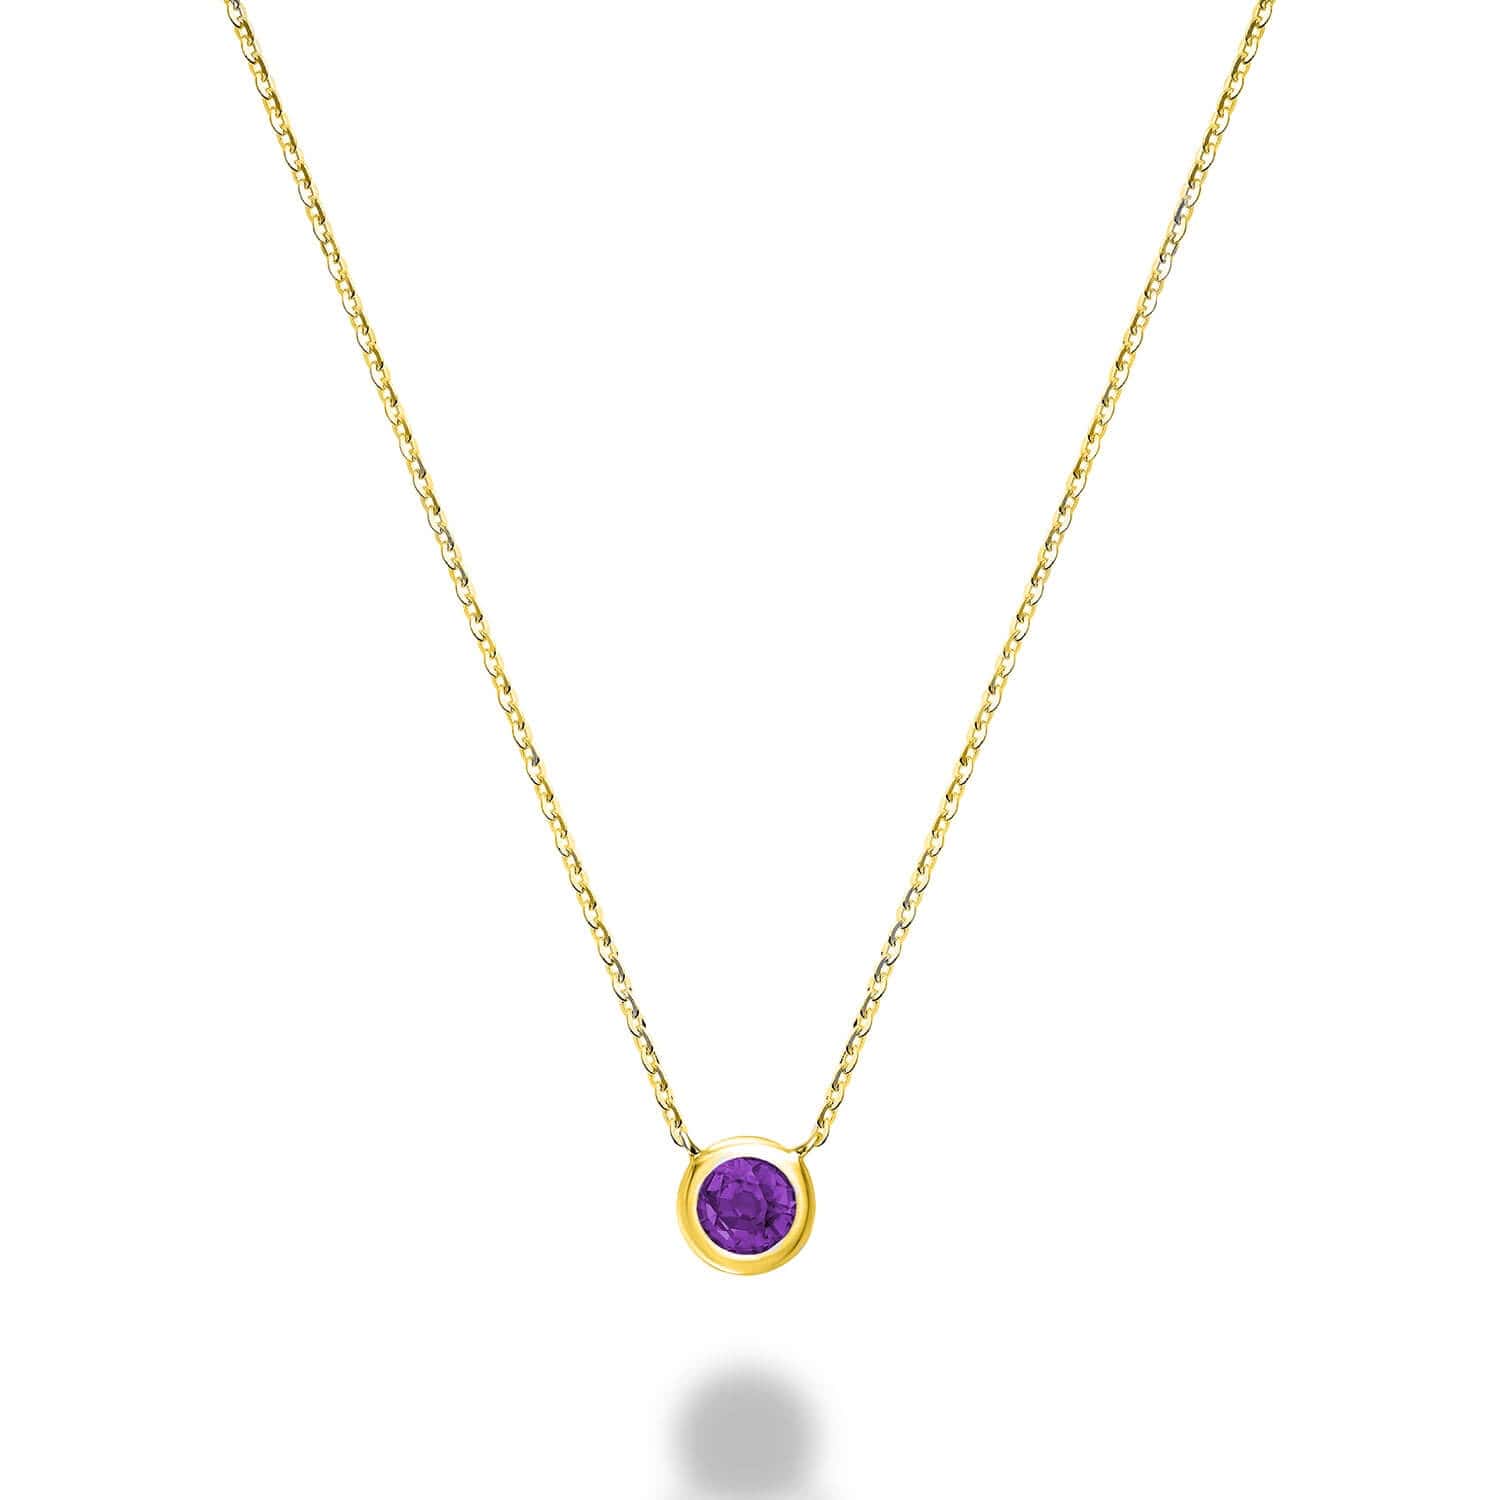 Amethyst Necklace - Bezel Set in 10kt Yellow Gold - Front View